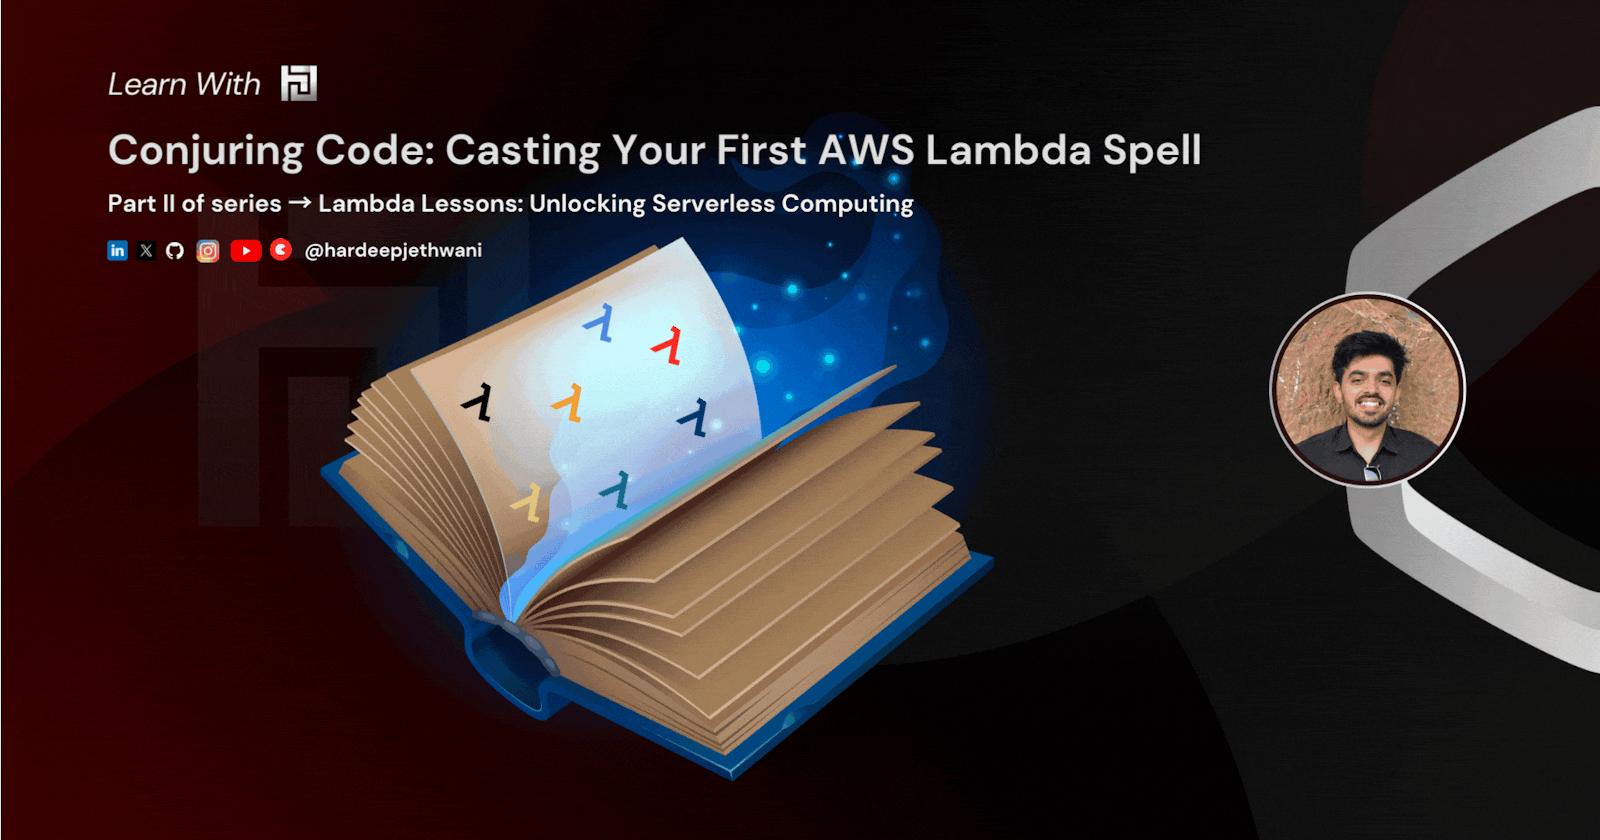 Conjuring Code: Casting Your First AWS Lambda Spell (Part II of series: Lambda Lessons: Unlocking Serverless Computing)